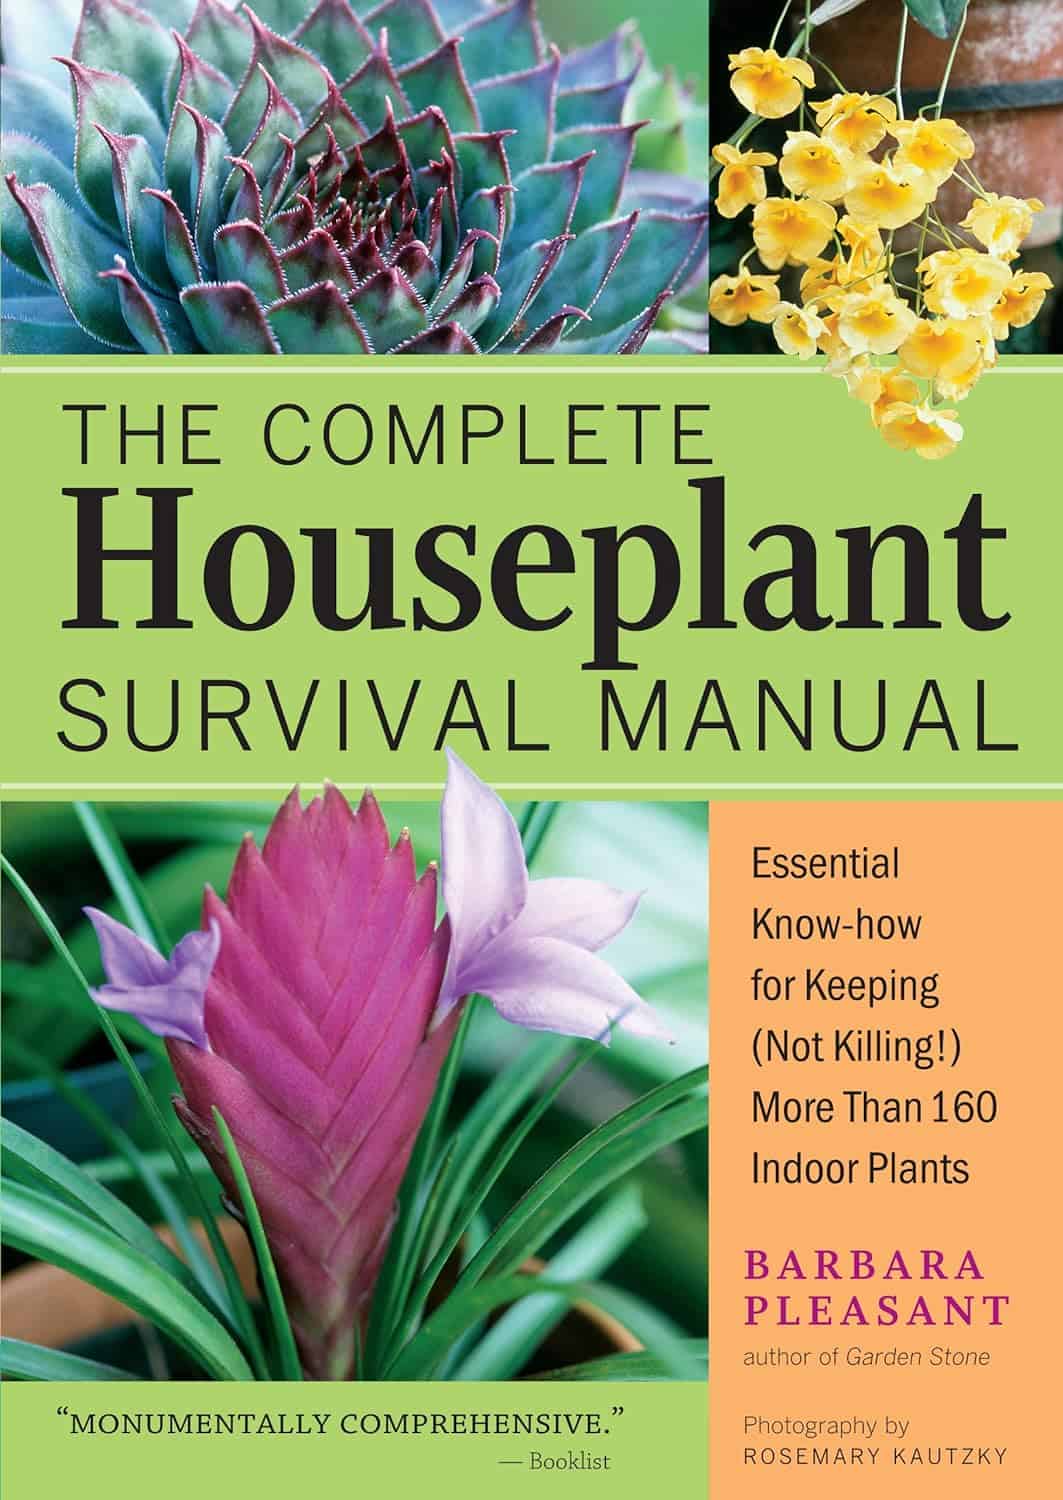 The Complete Houseplant Survival Manual: Essential Know-How for Keeping (Not Killing) More Than 160 Indoor Plants